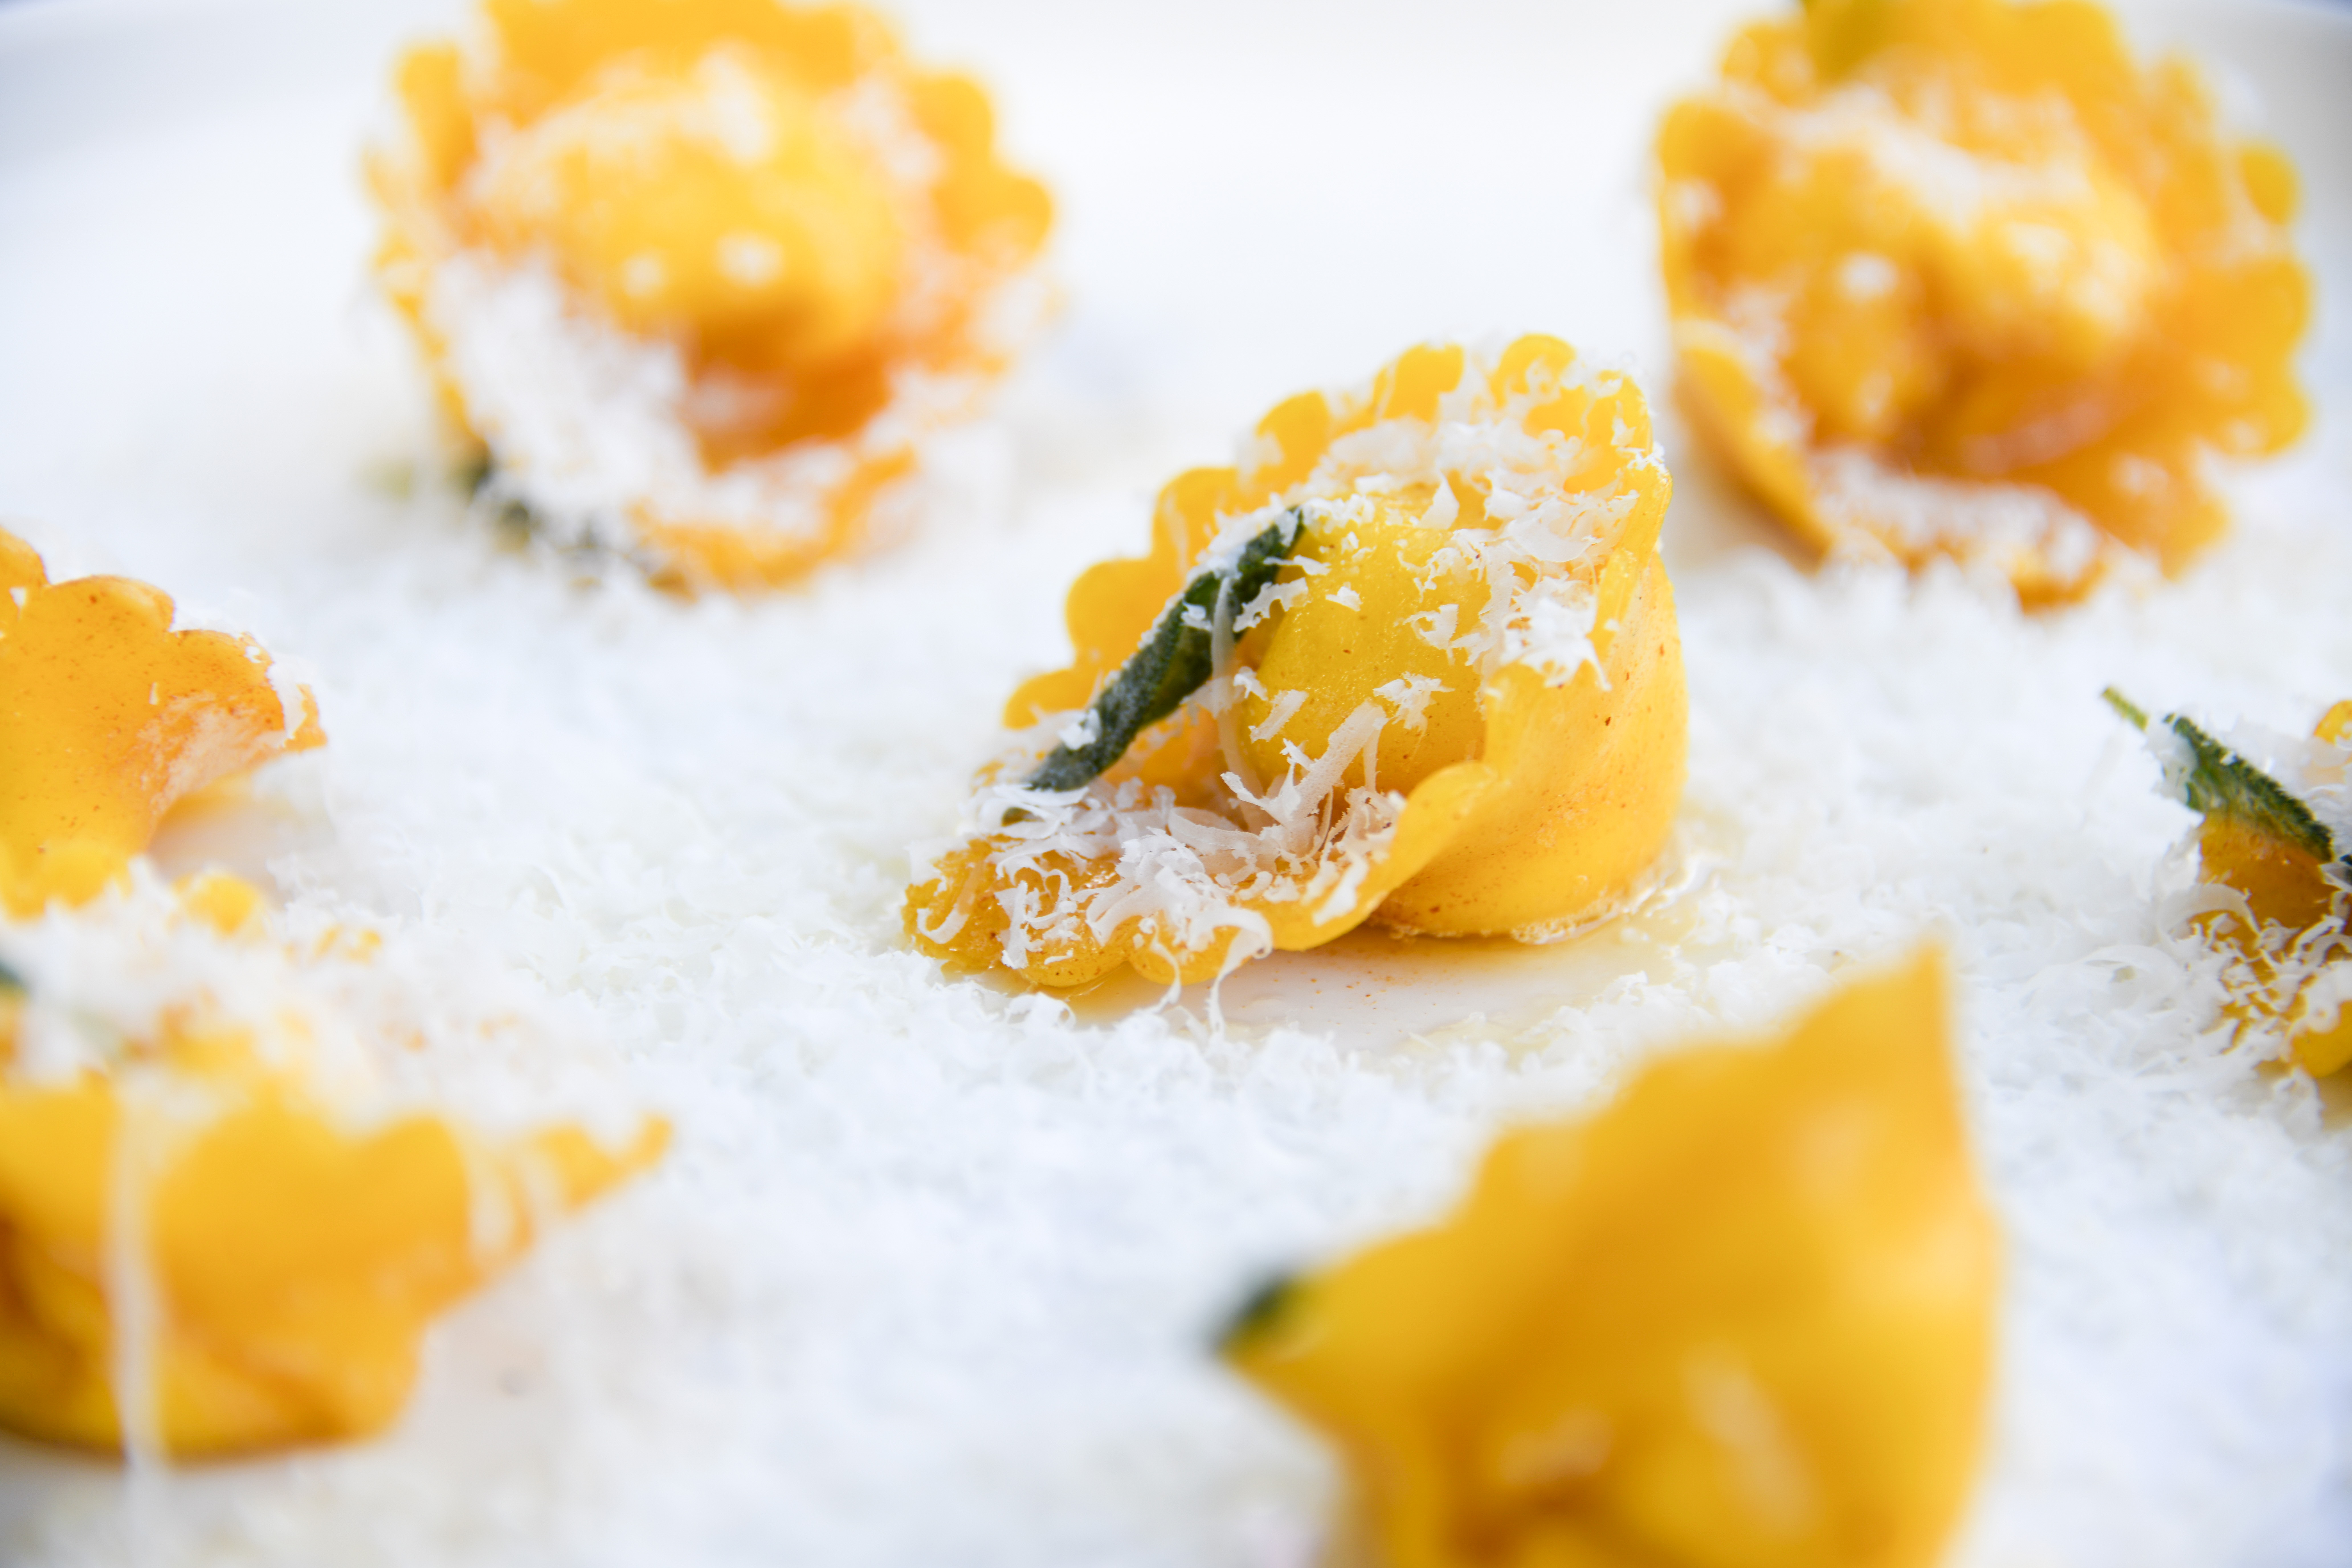 Ricotta and spinach cappalletti with sage brown butter from new Sandy Springs Italian restaurant Tre Vele.